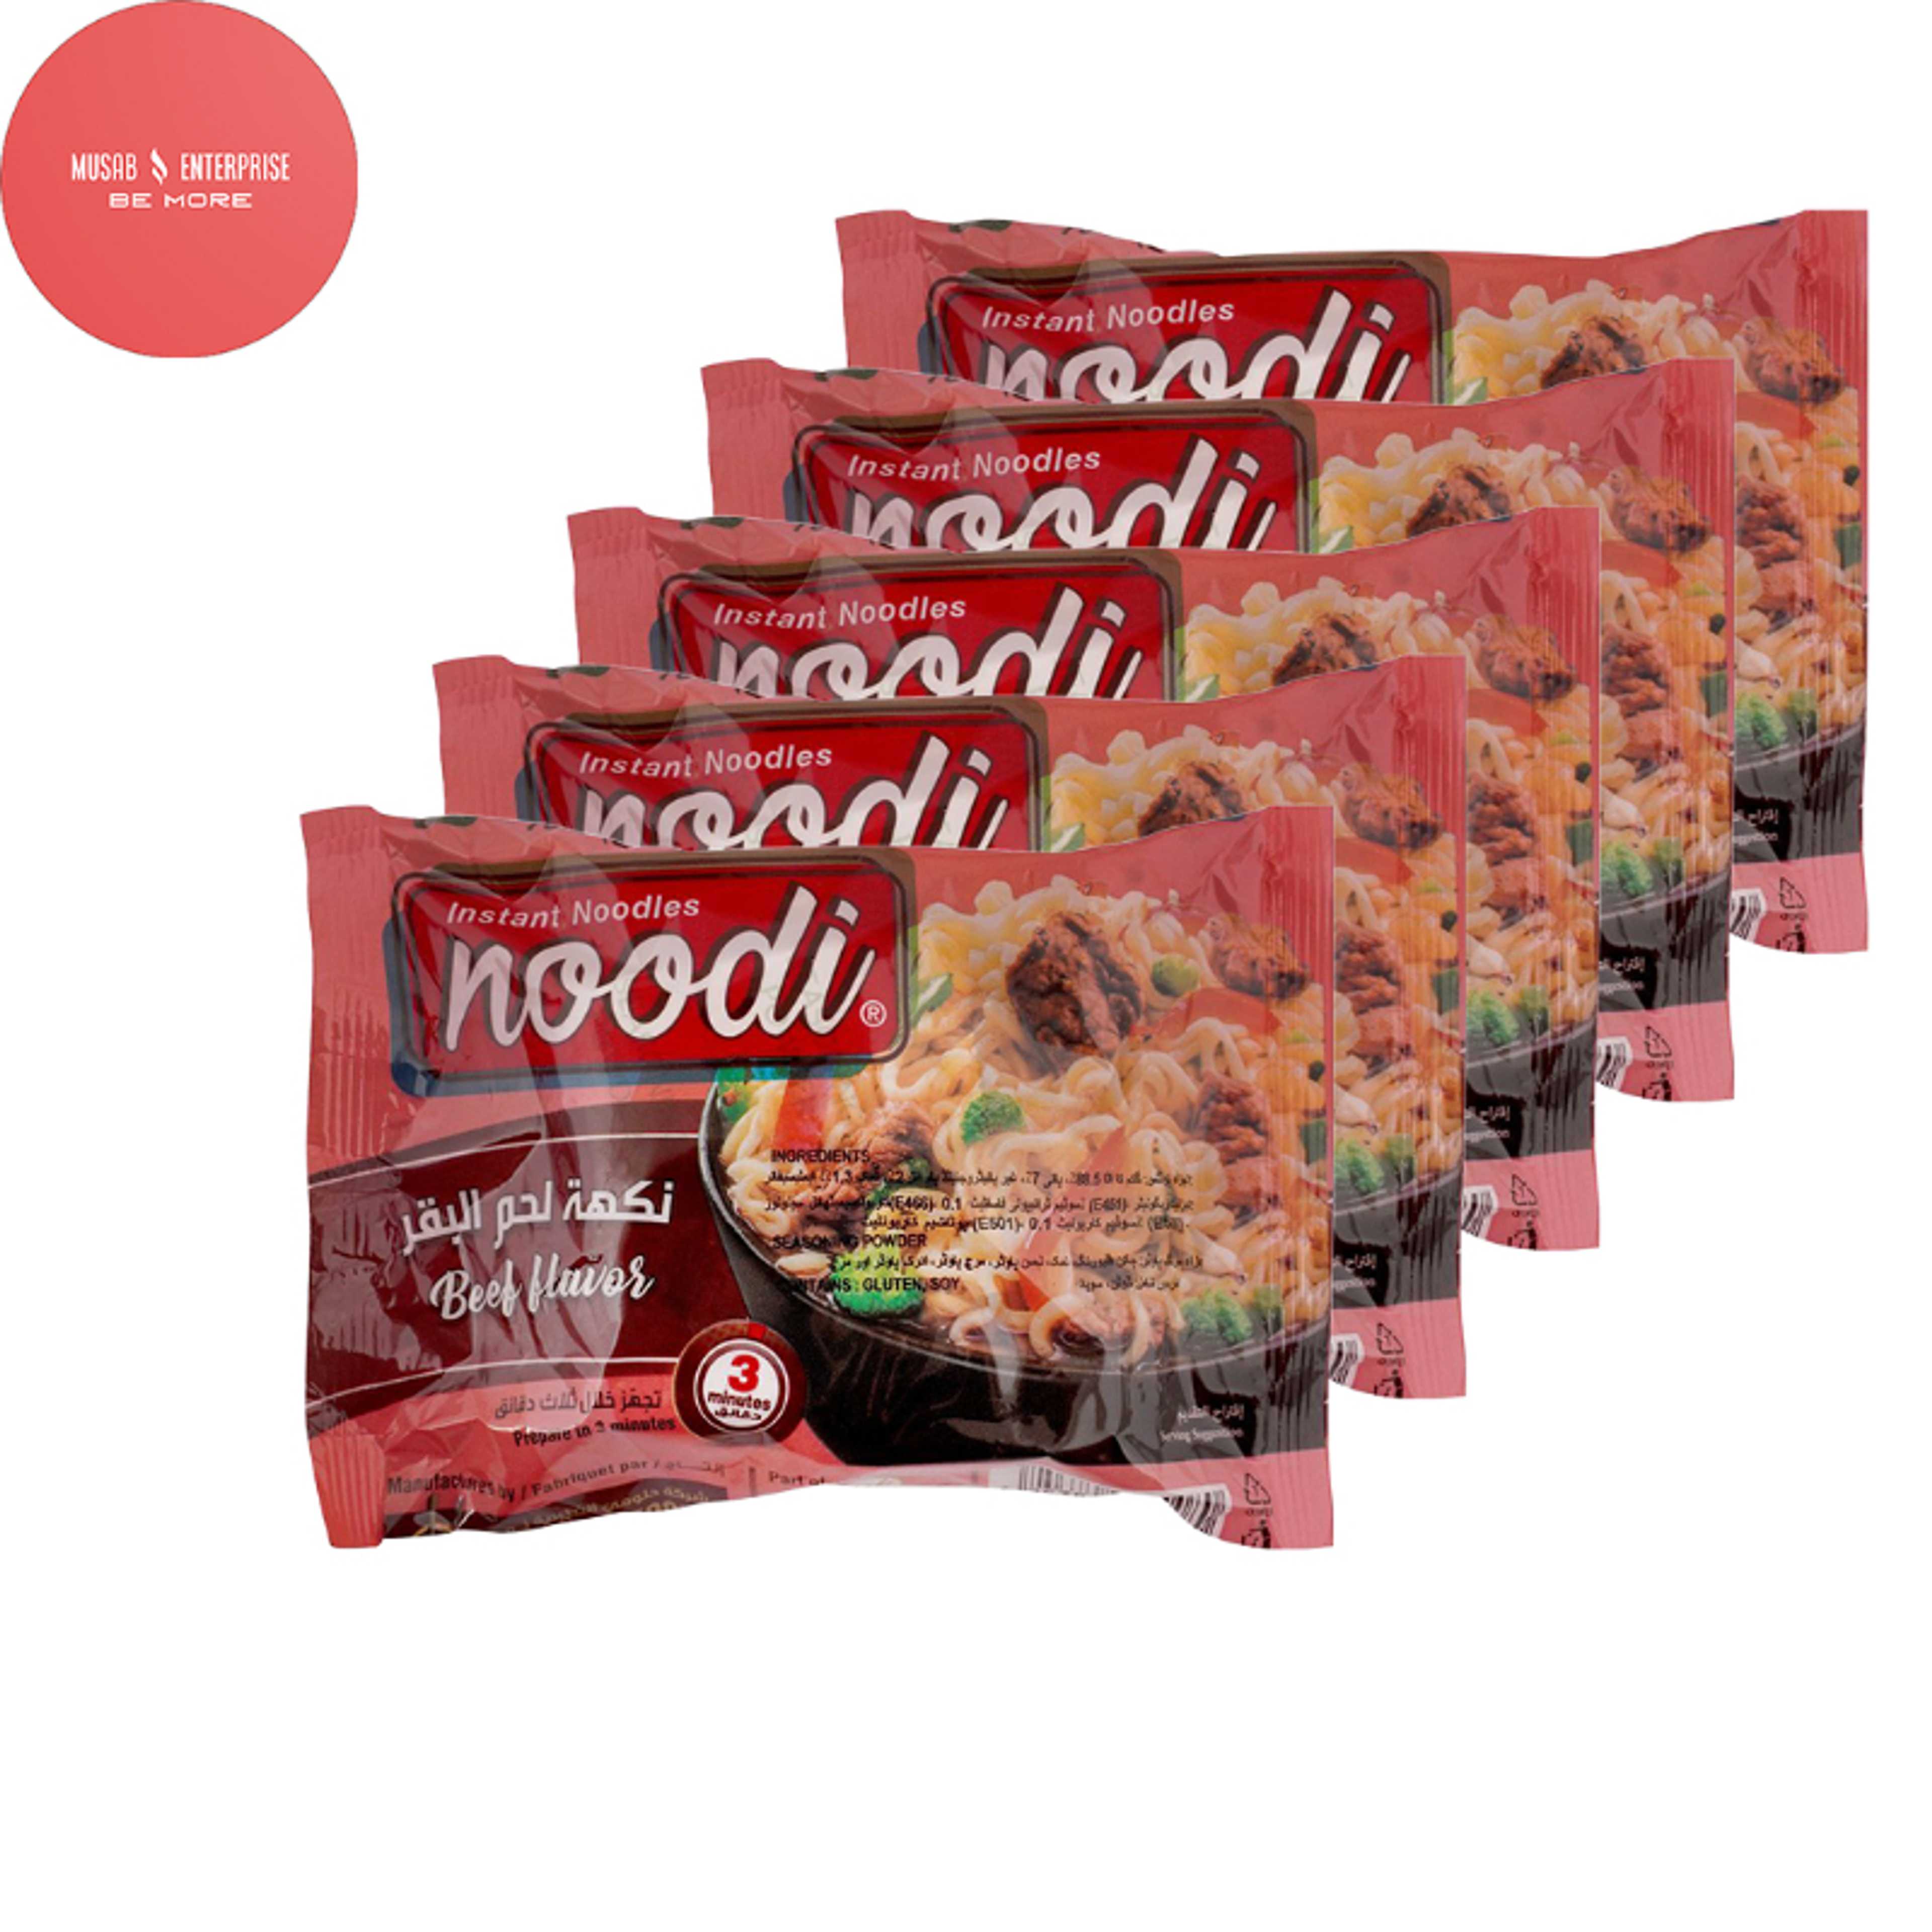 Noodi Beef Flavor Instant Noodles, 70g, Pack of 5 Noodles (Available in 9 Exciting Flavors)